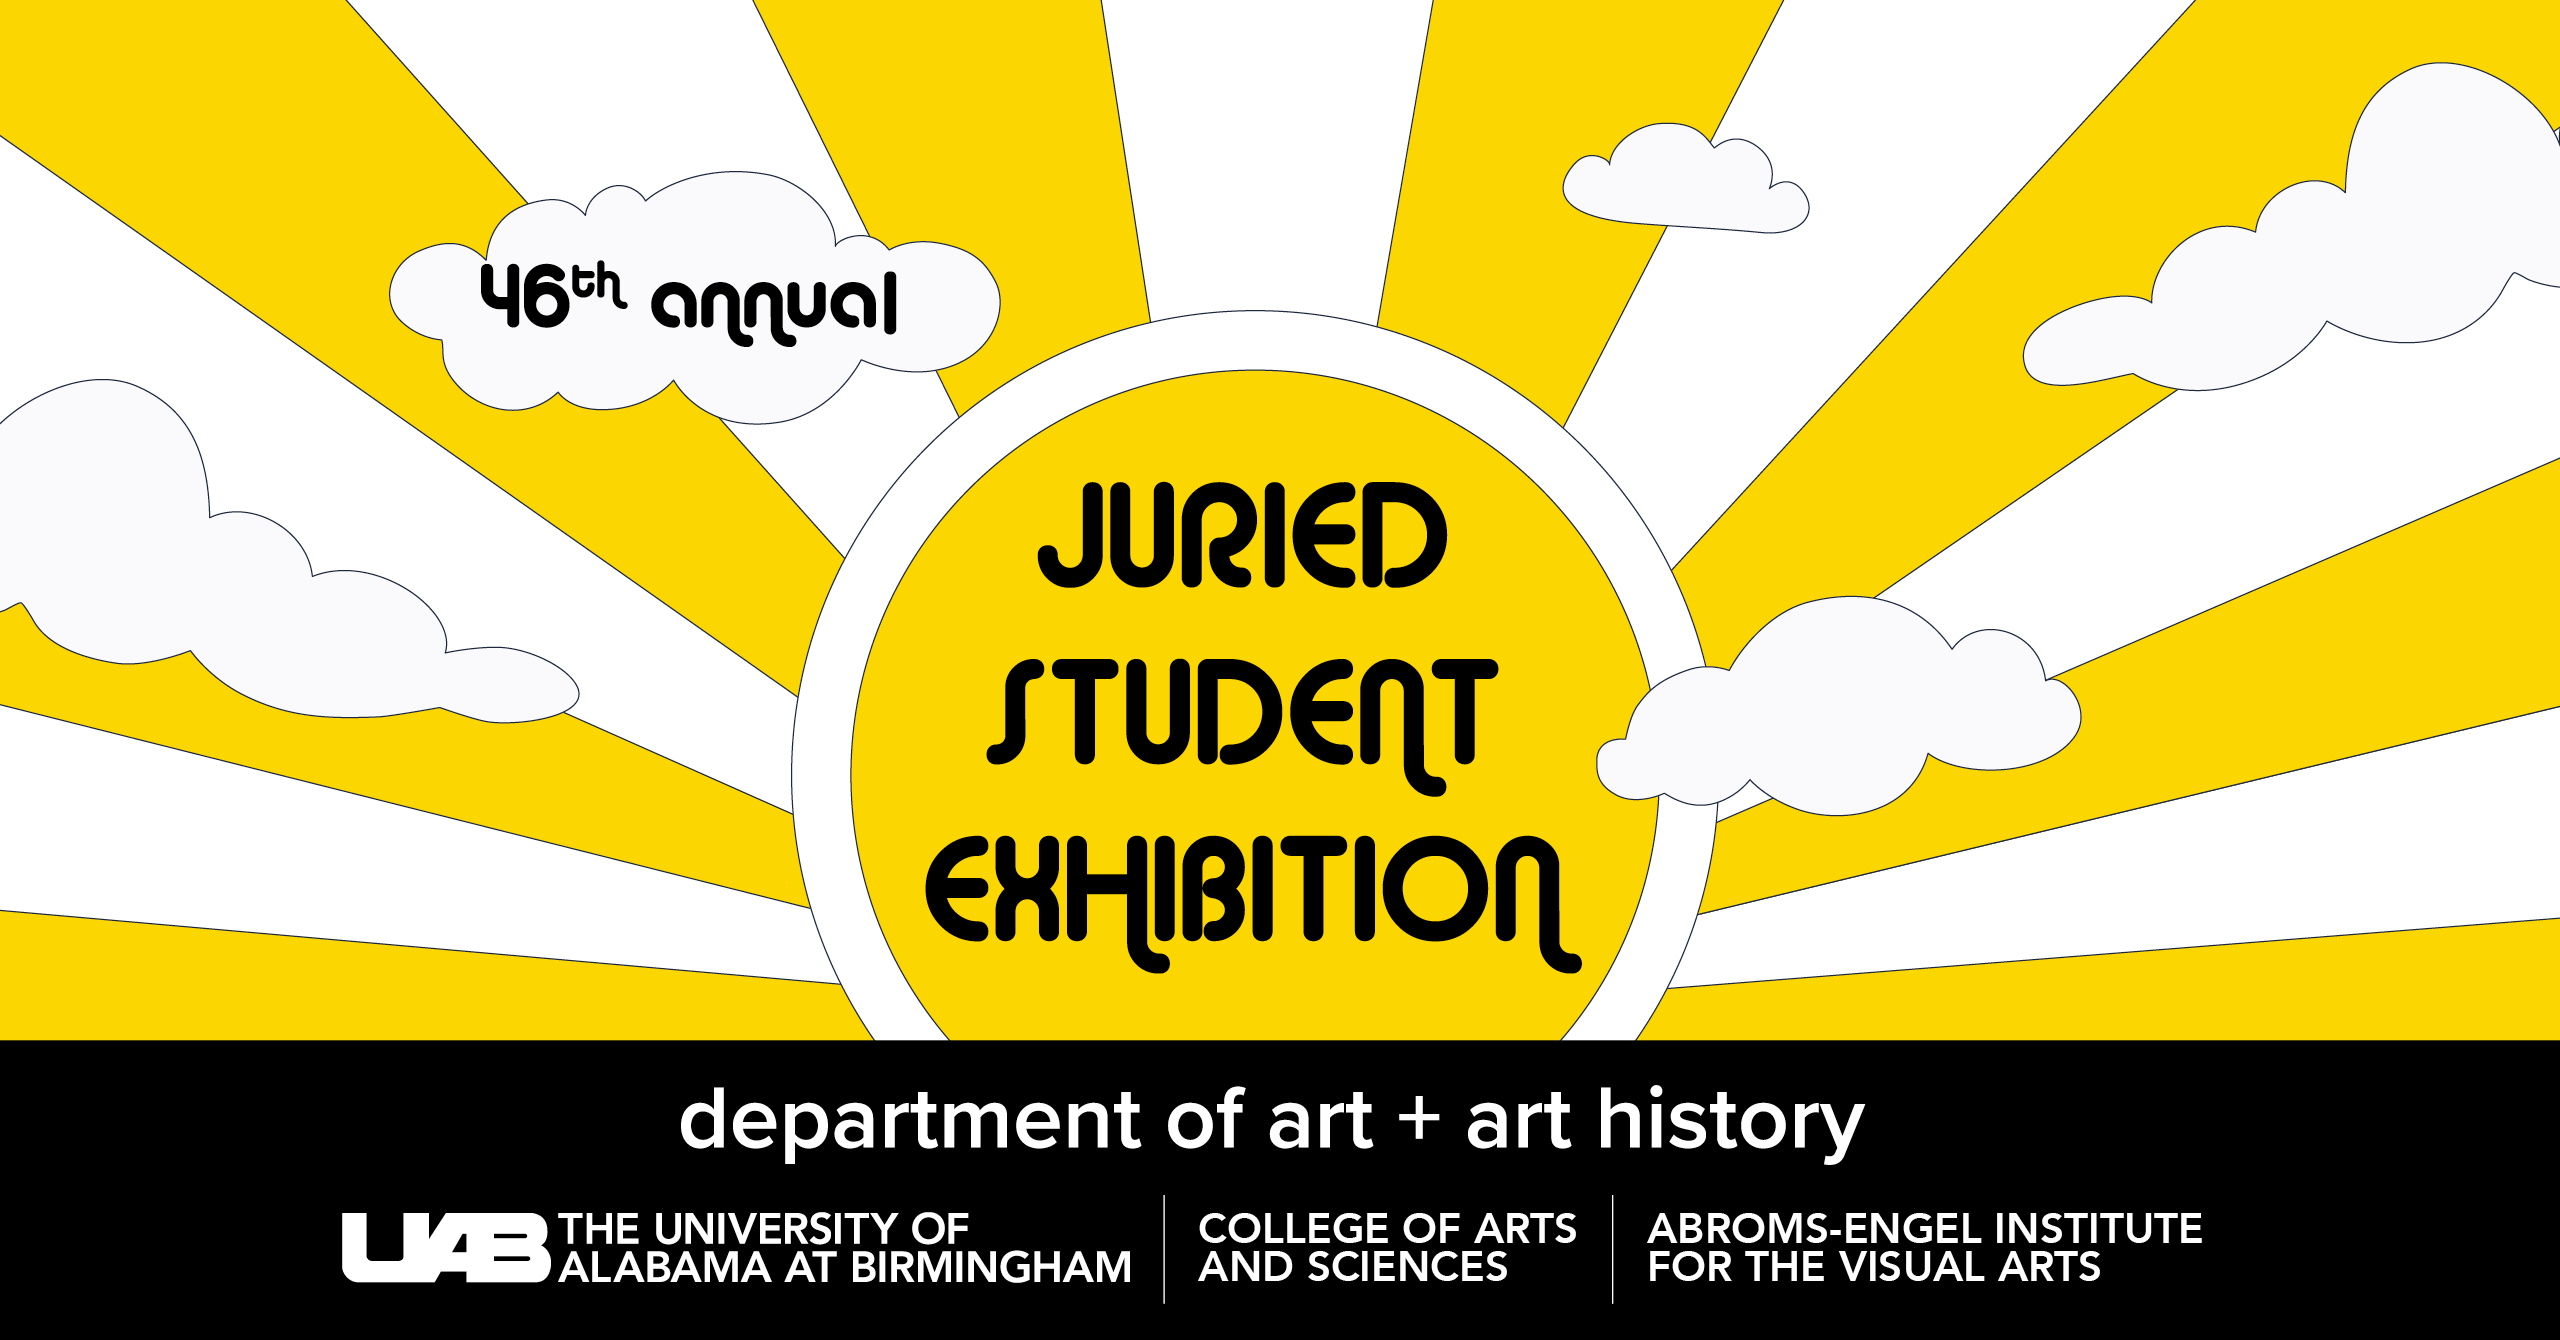 Juried FB AEIVA and UAB Department of Art and Art History Present 46th Annual Juried Student Exhibition